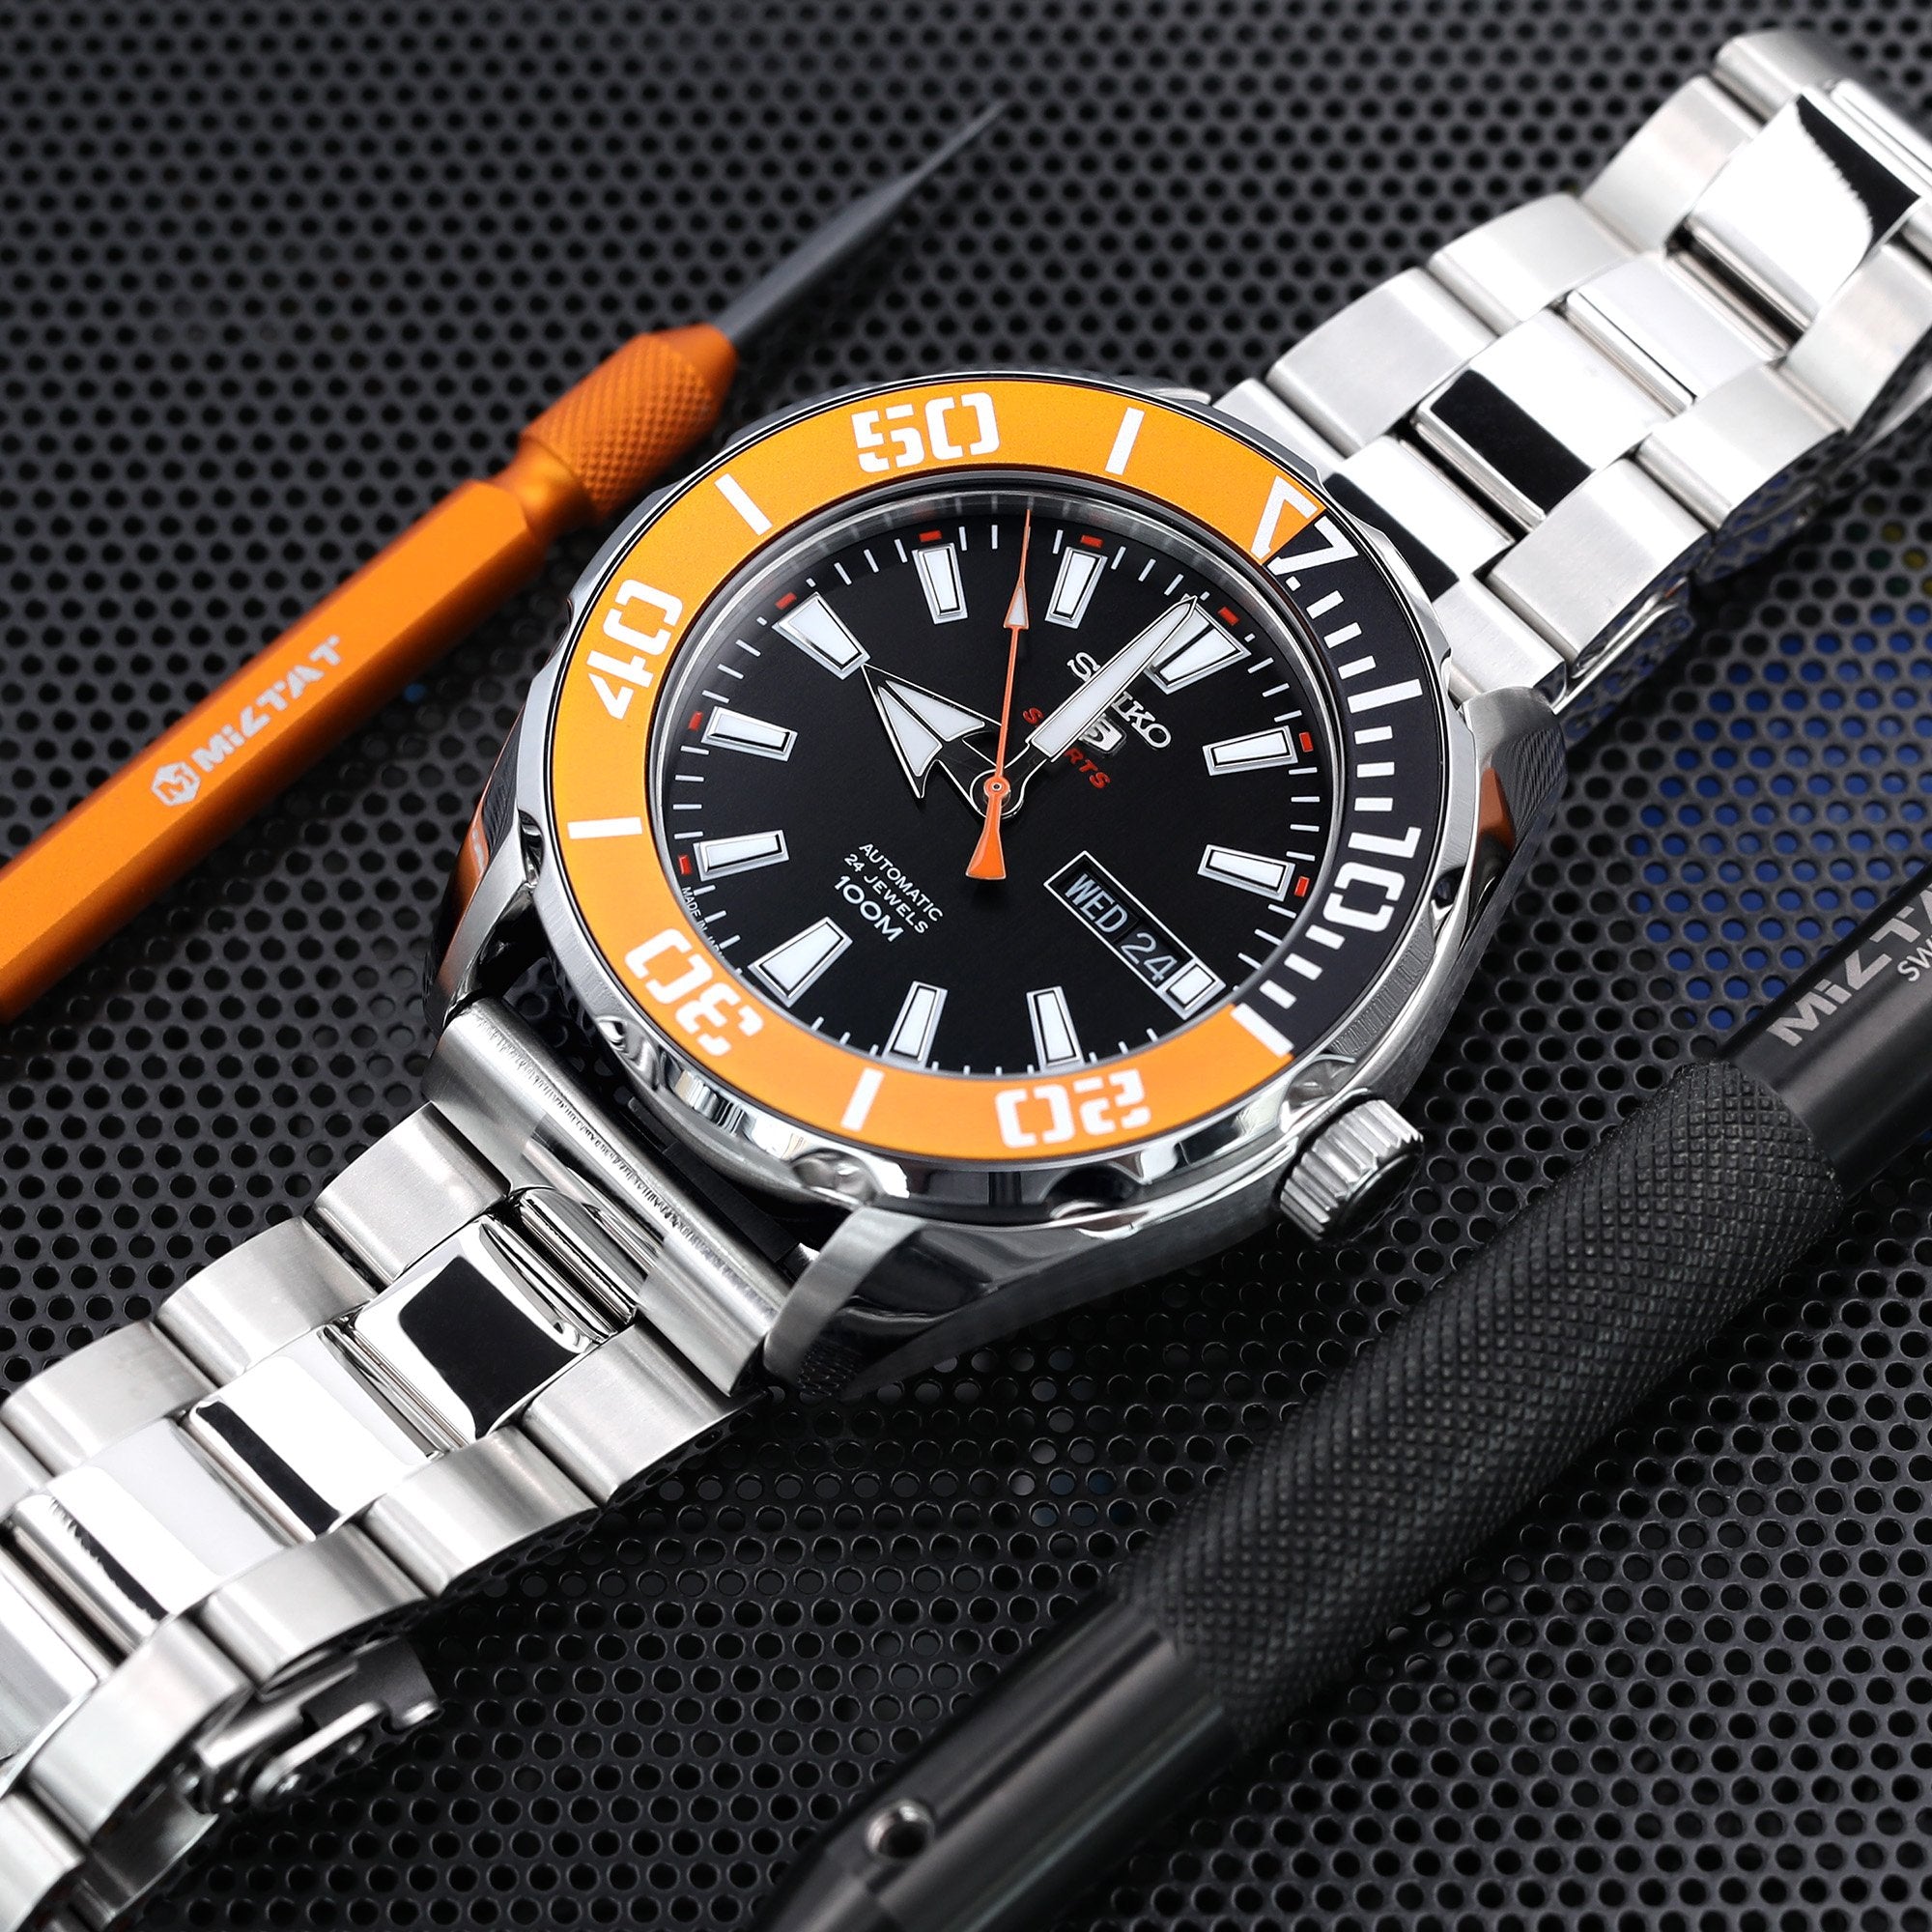 Seiko 5 Sports Watch SRPC59J1 Orange Black 100M Automatic watch MADE in JAPAN Strapcode Watch Bands